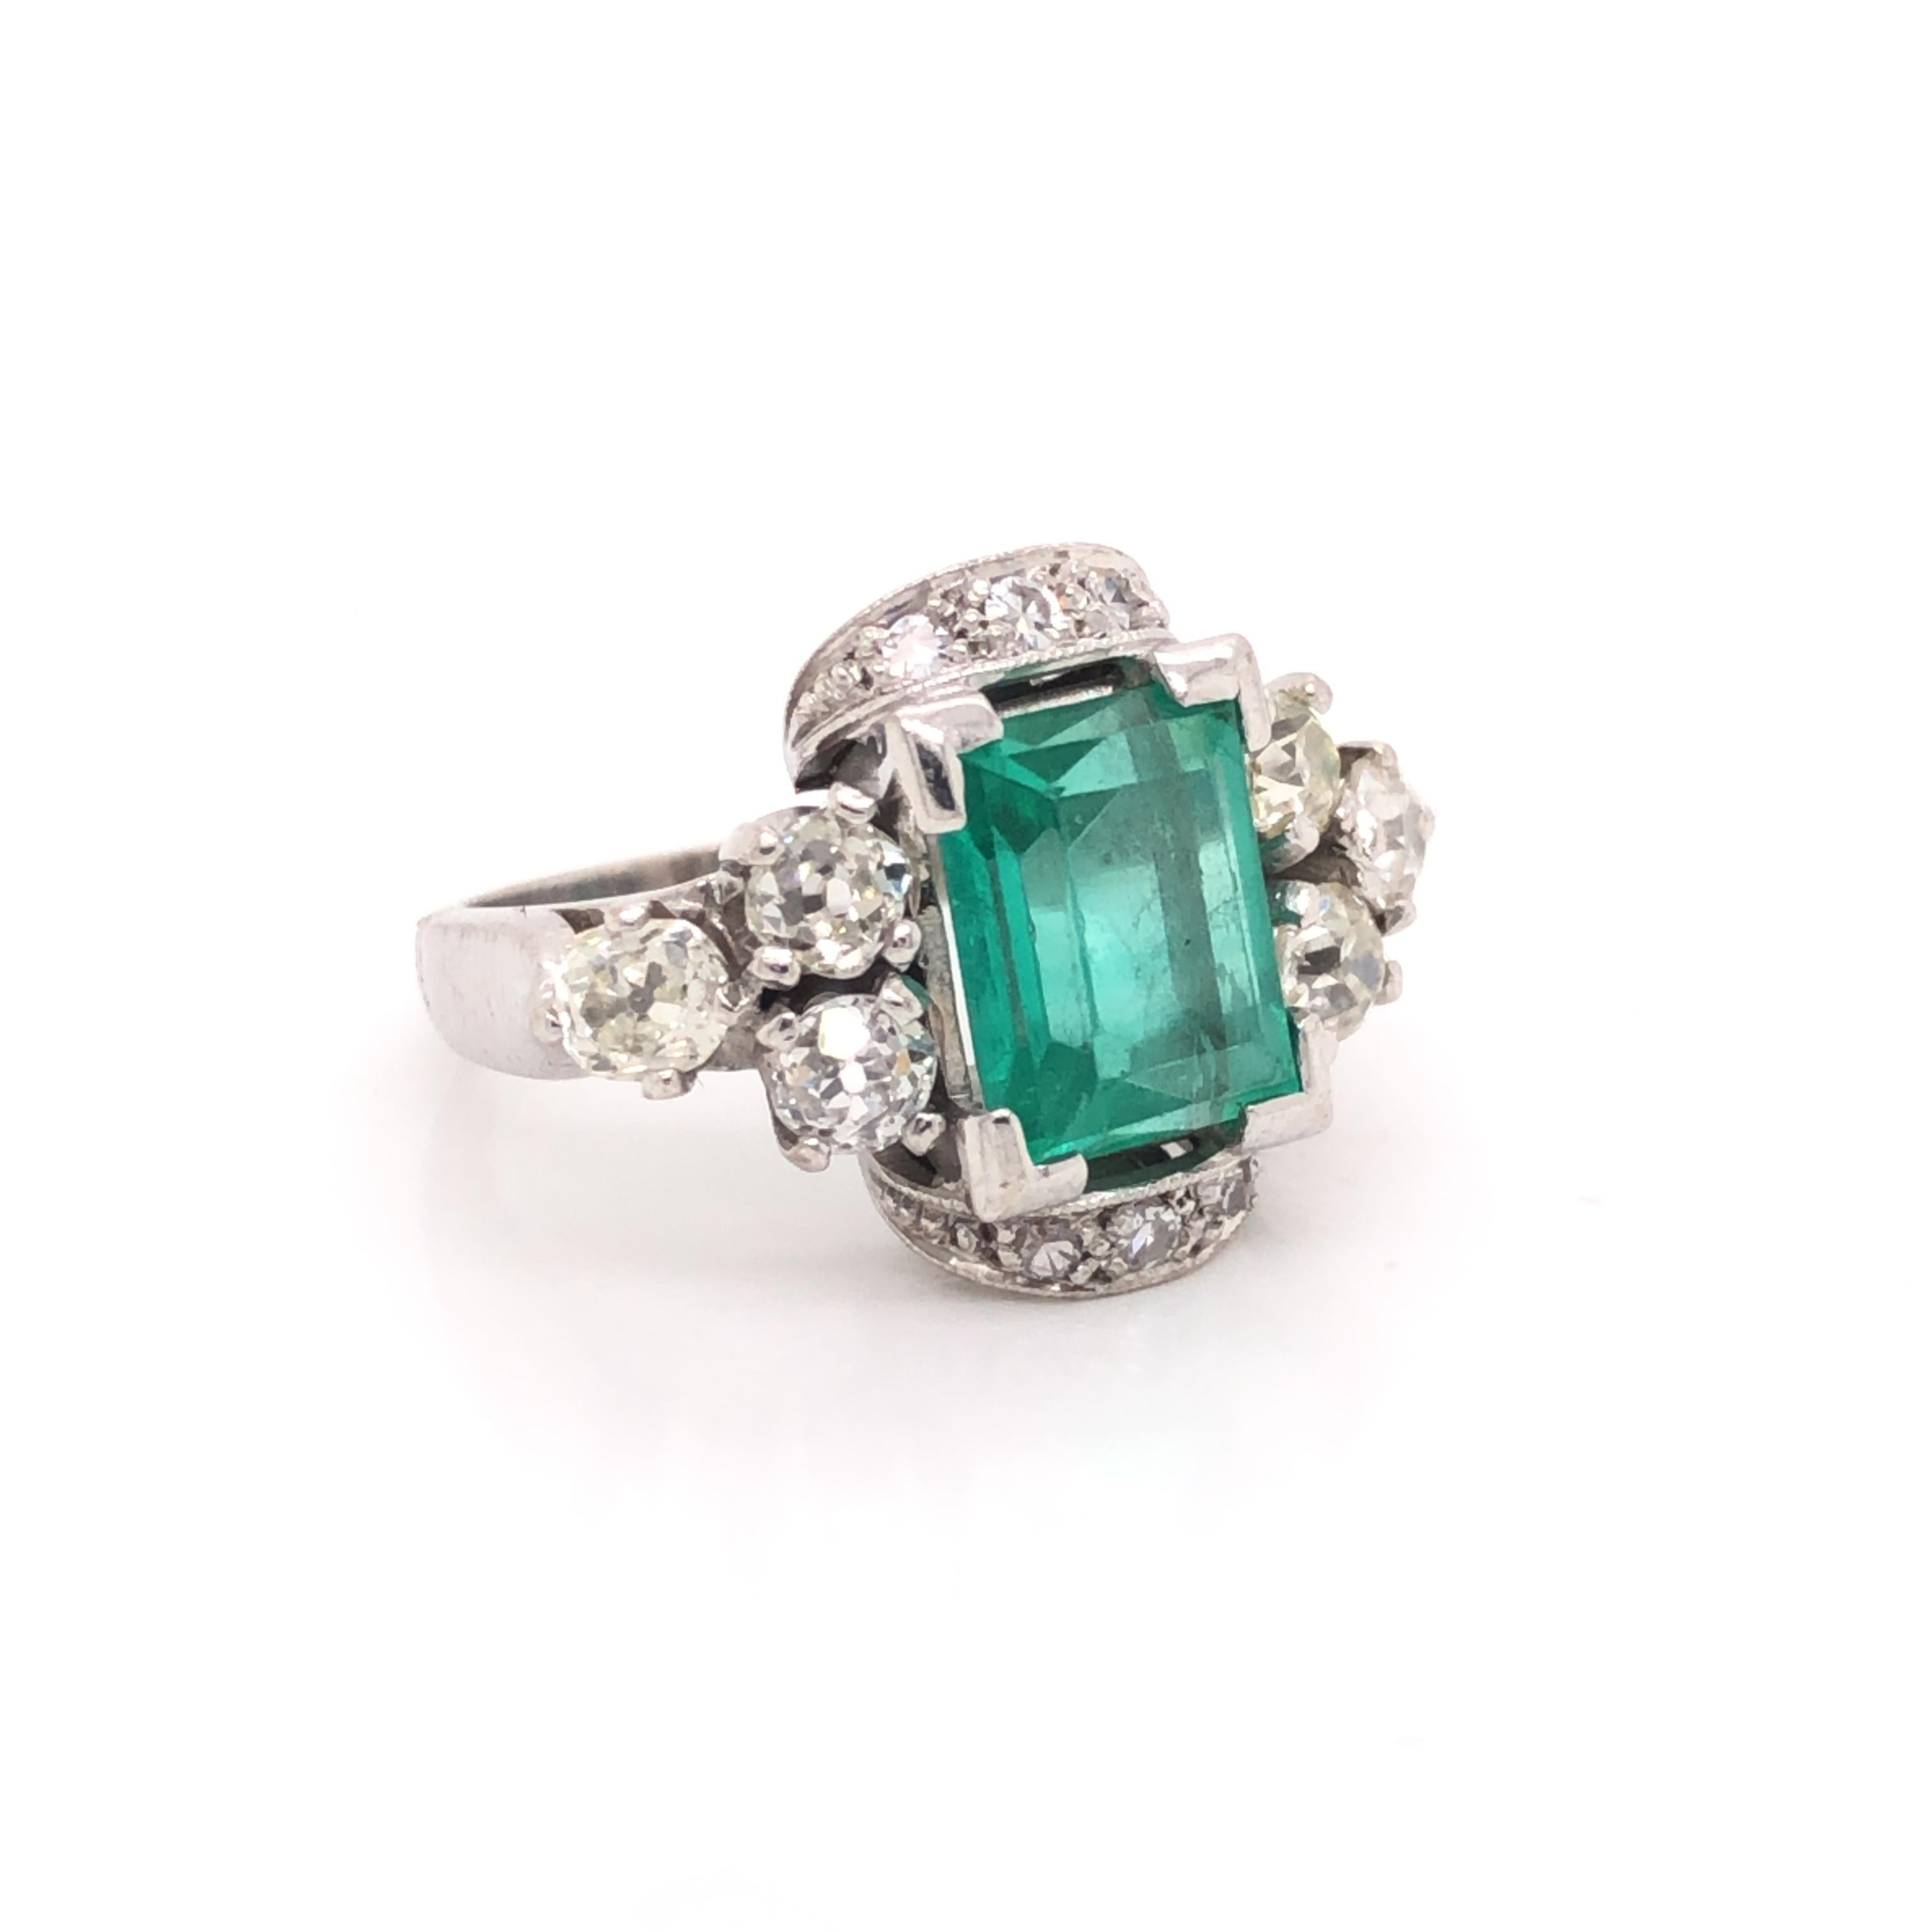 Gorgeous ring crafted in 18k white gold. This fine Art Deco period ring is a real show stopper. The ring is highlighted with one emerald gemstone that displays an emerald cut and shows a beautiful green color. The center stone is adorned with old